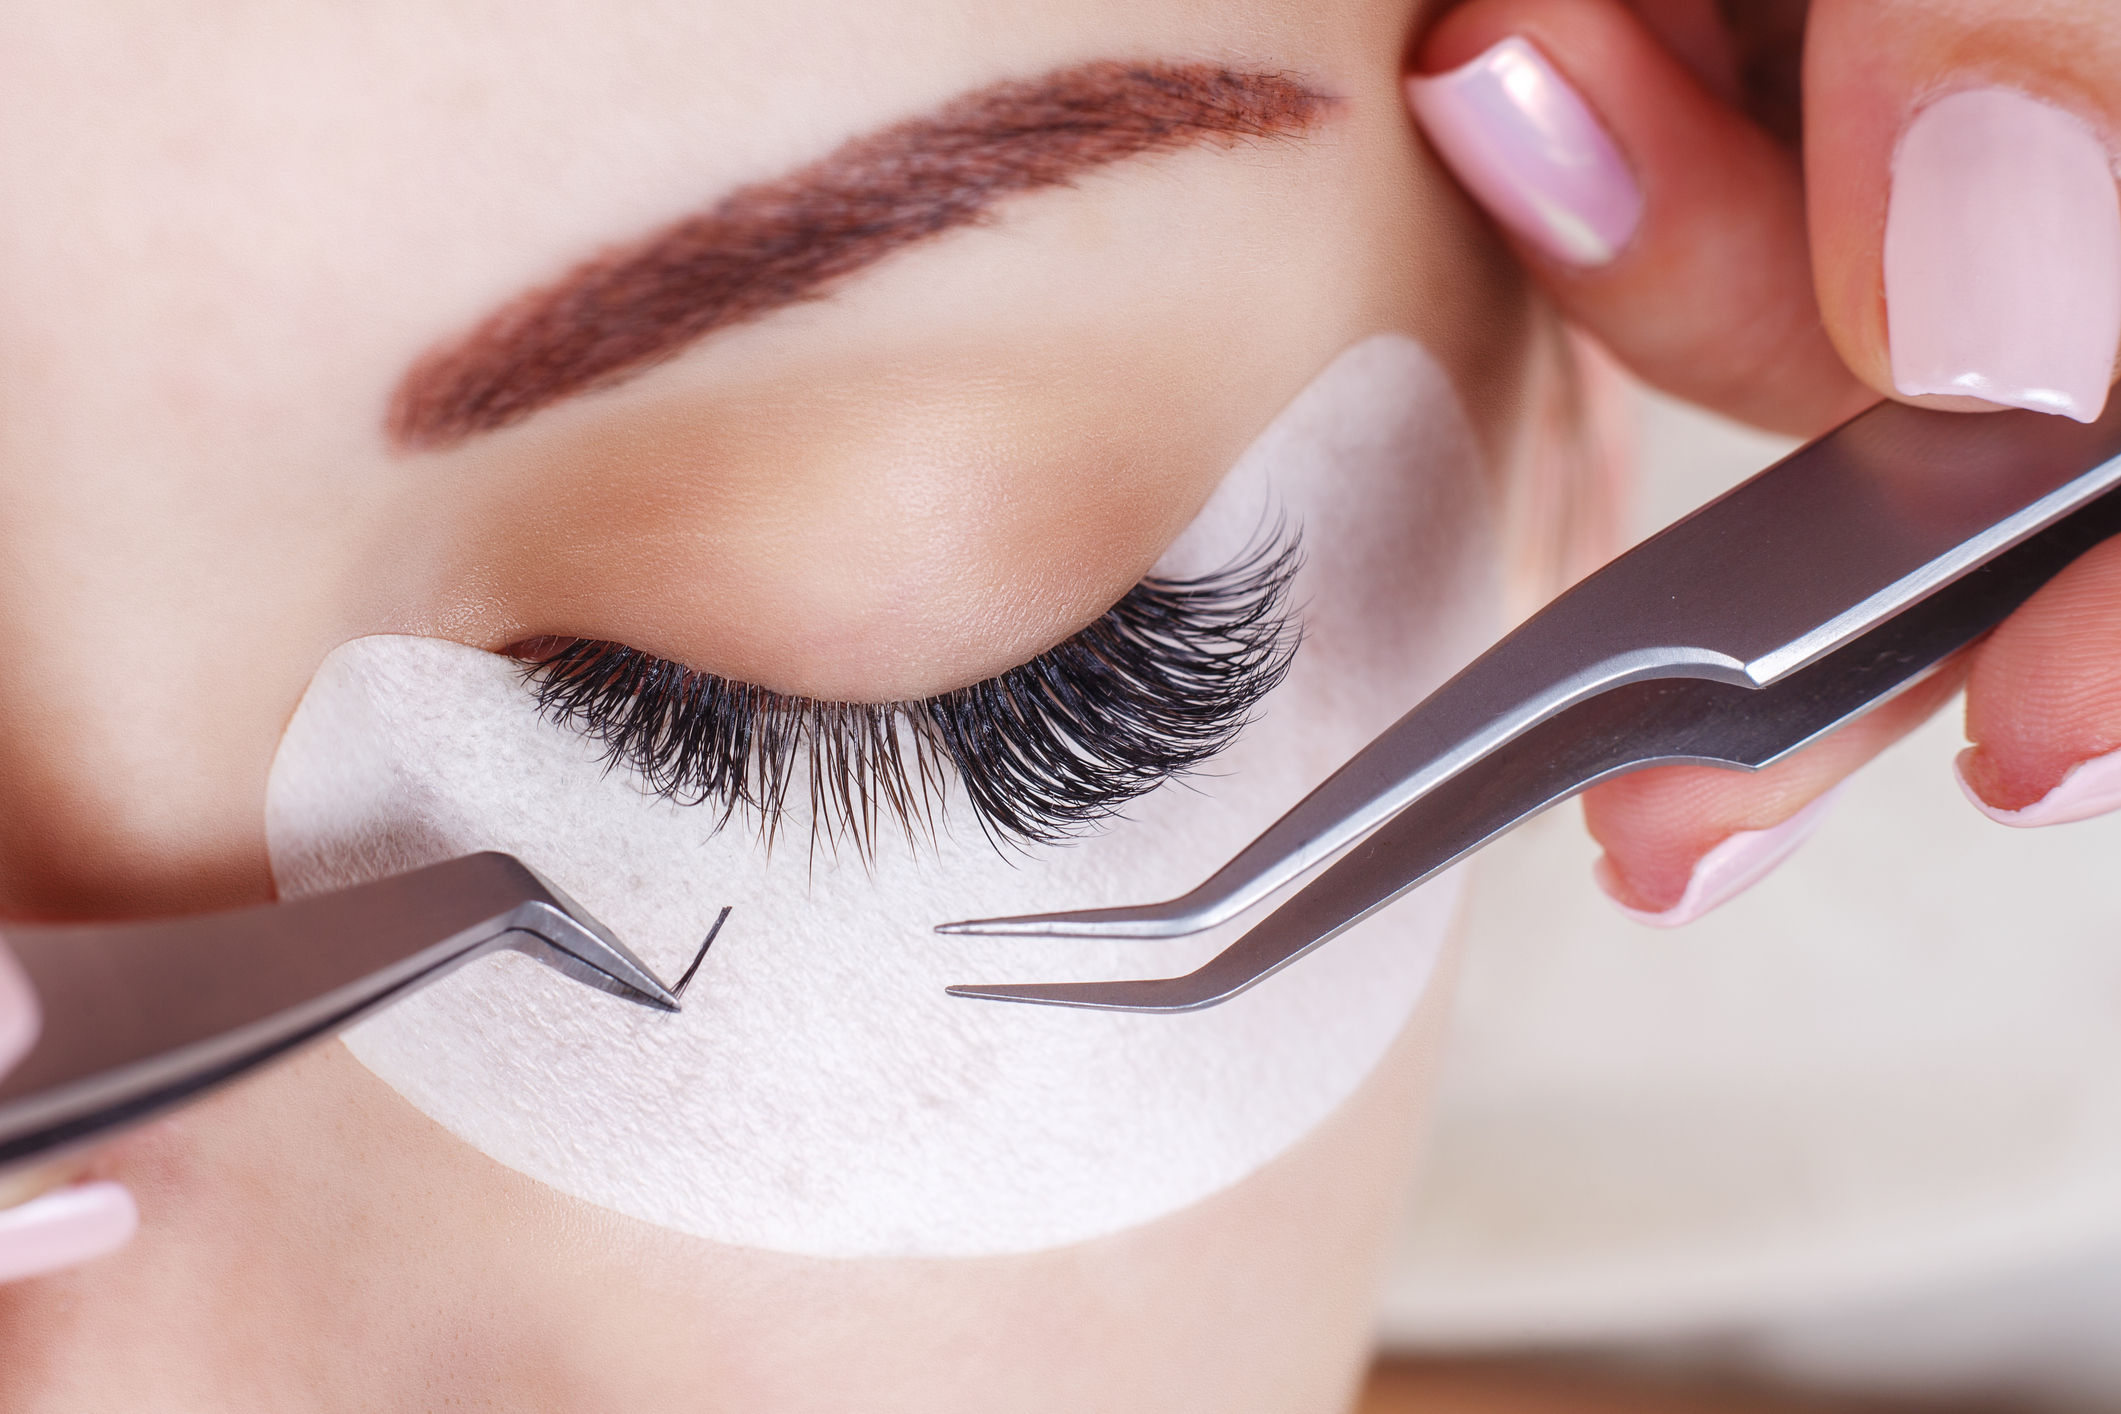 5 best lash bars in Kuala Lumpur to give your lashes extra lift and volume